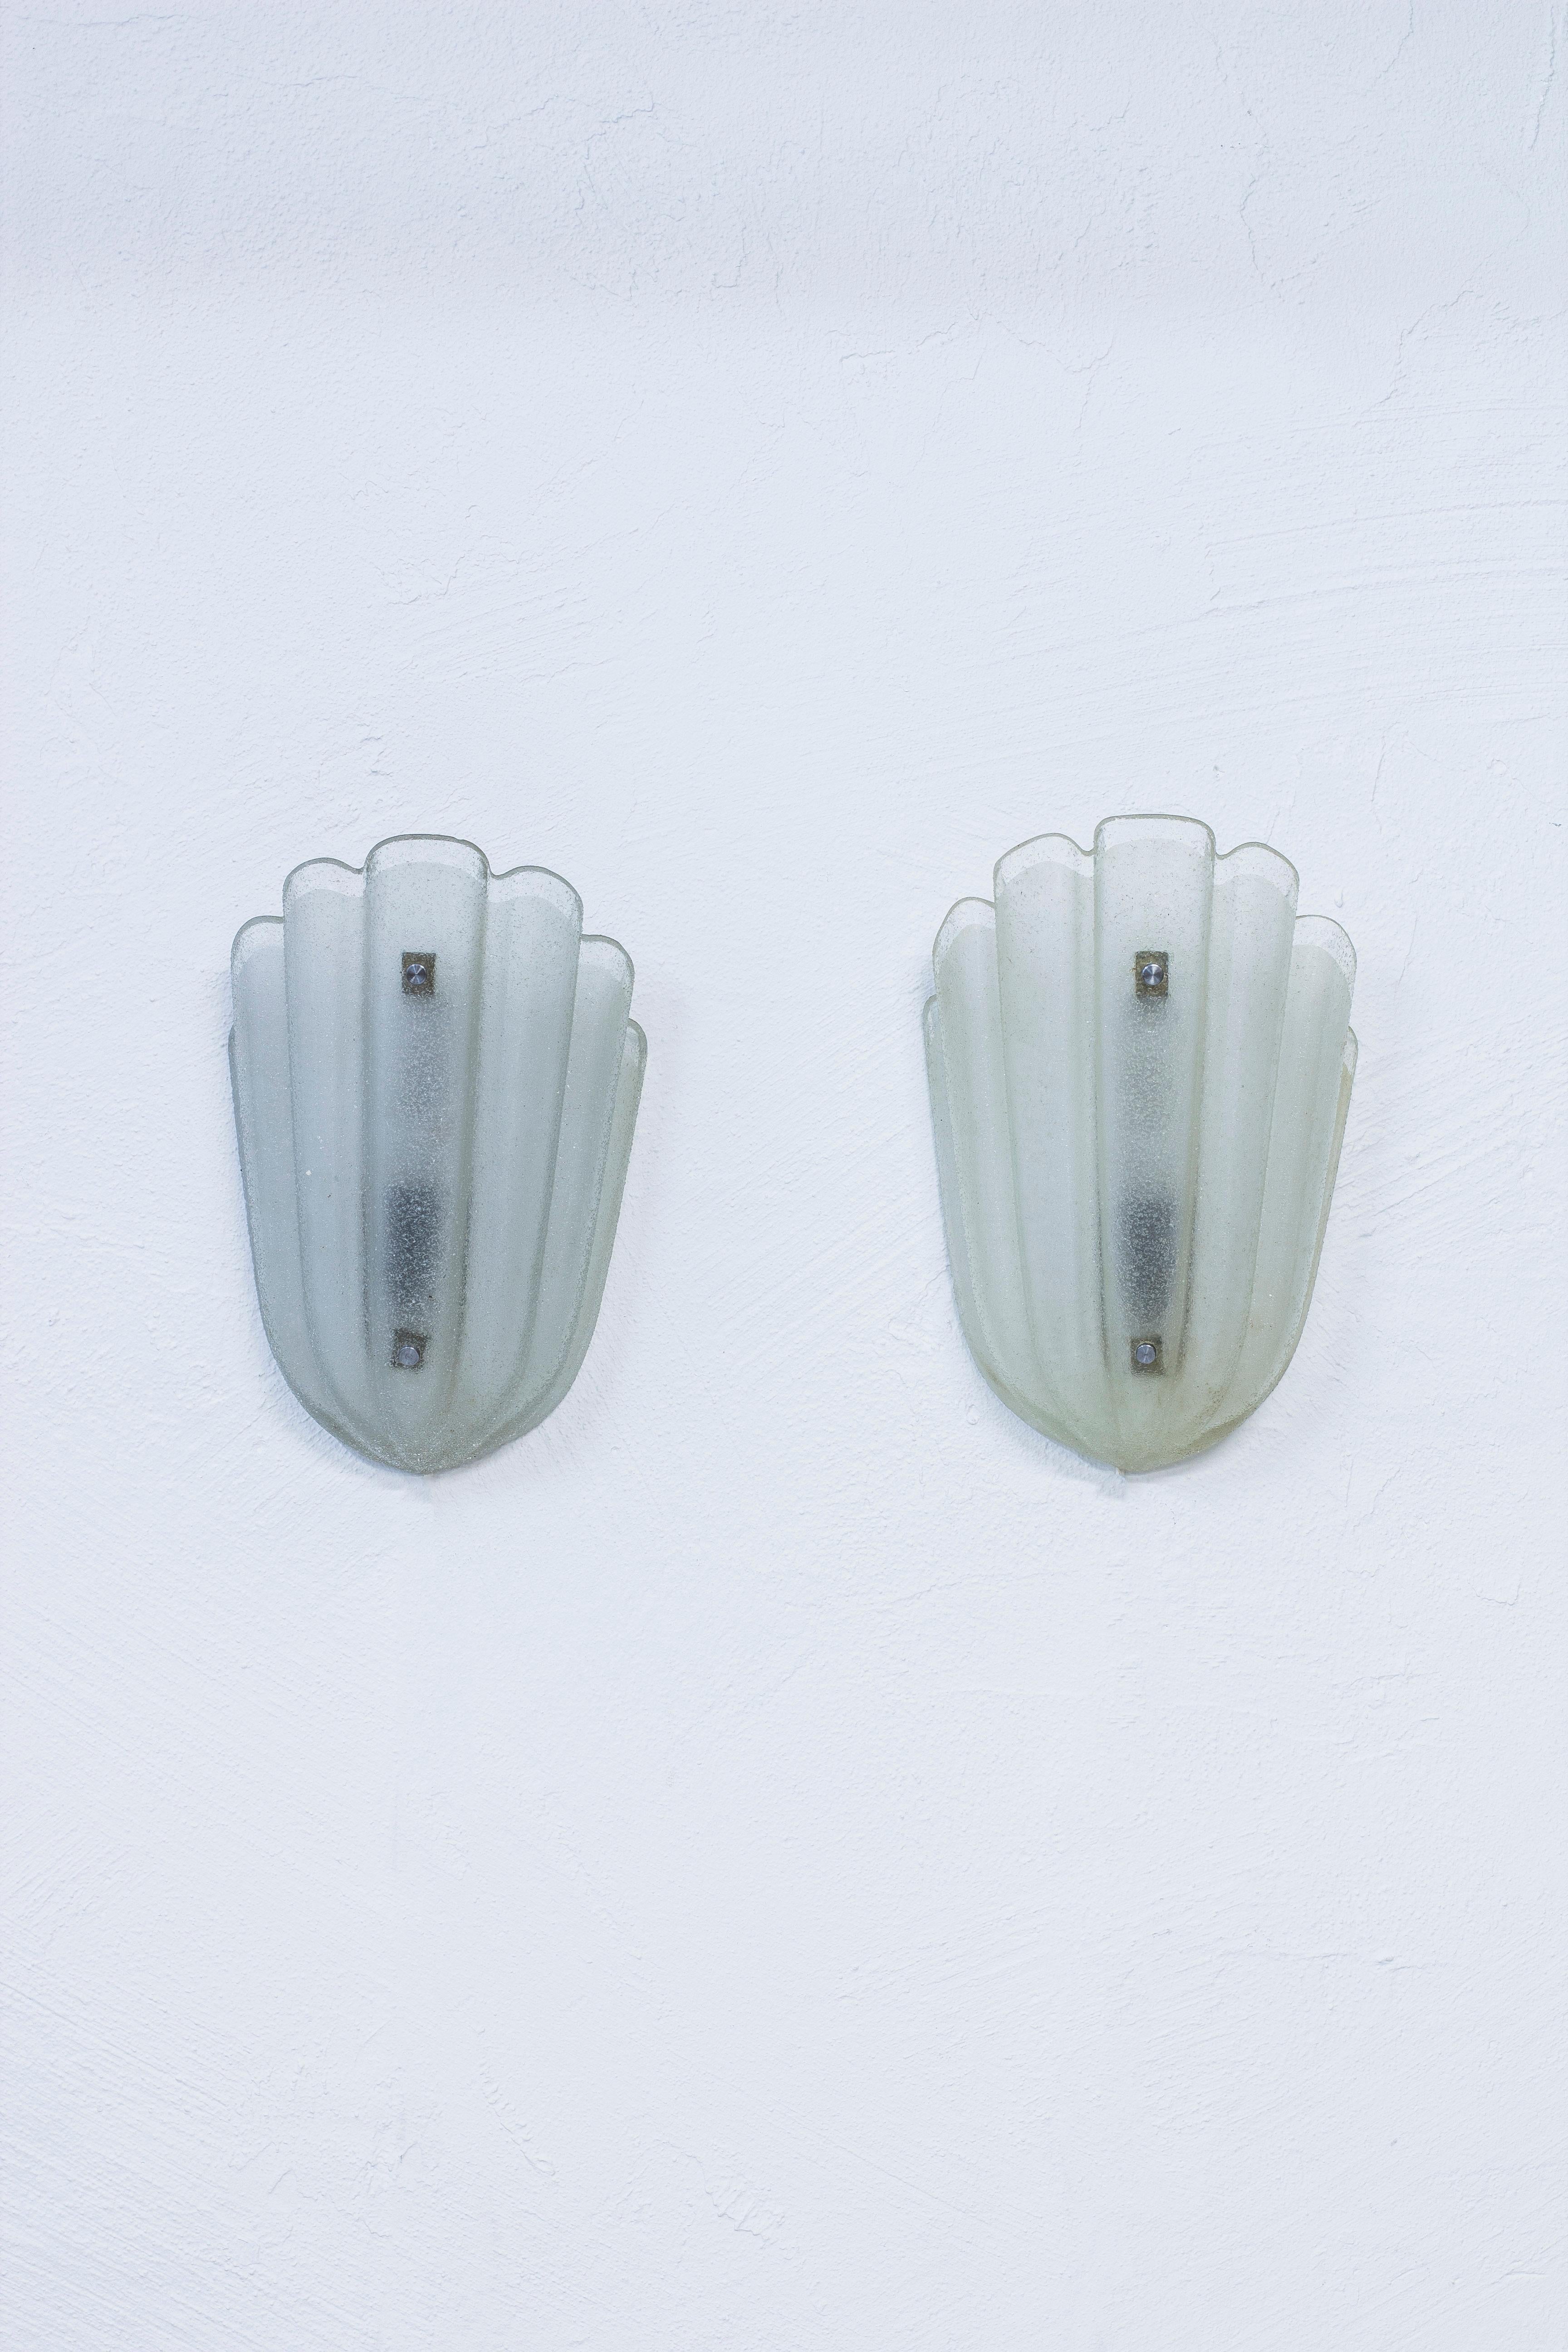 Pair of wall lamps produced in Sweden during the 1940s by Orrefors. Made from clear white glass with a hint of blue. Nickel plated bolt details. In working order with new electric cables. Good vintage condition with age related use and